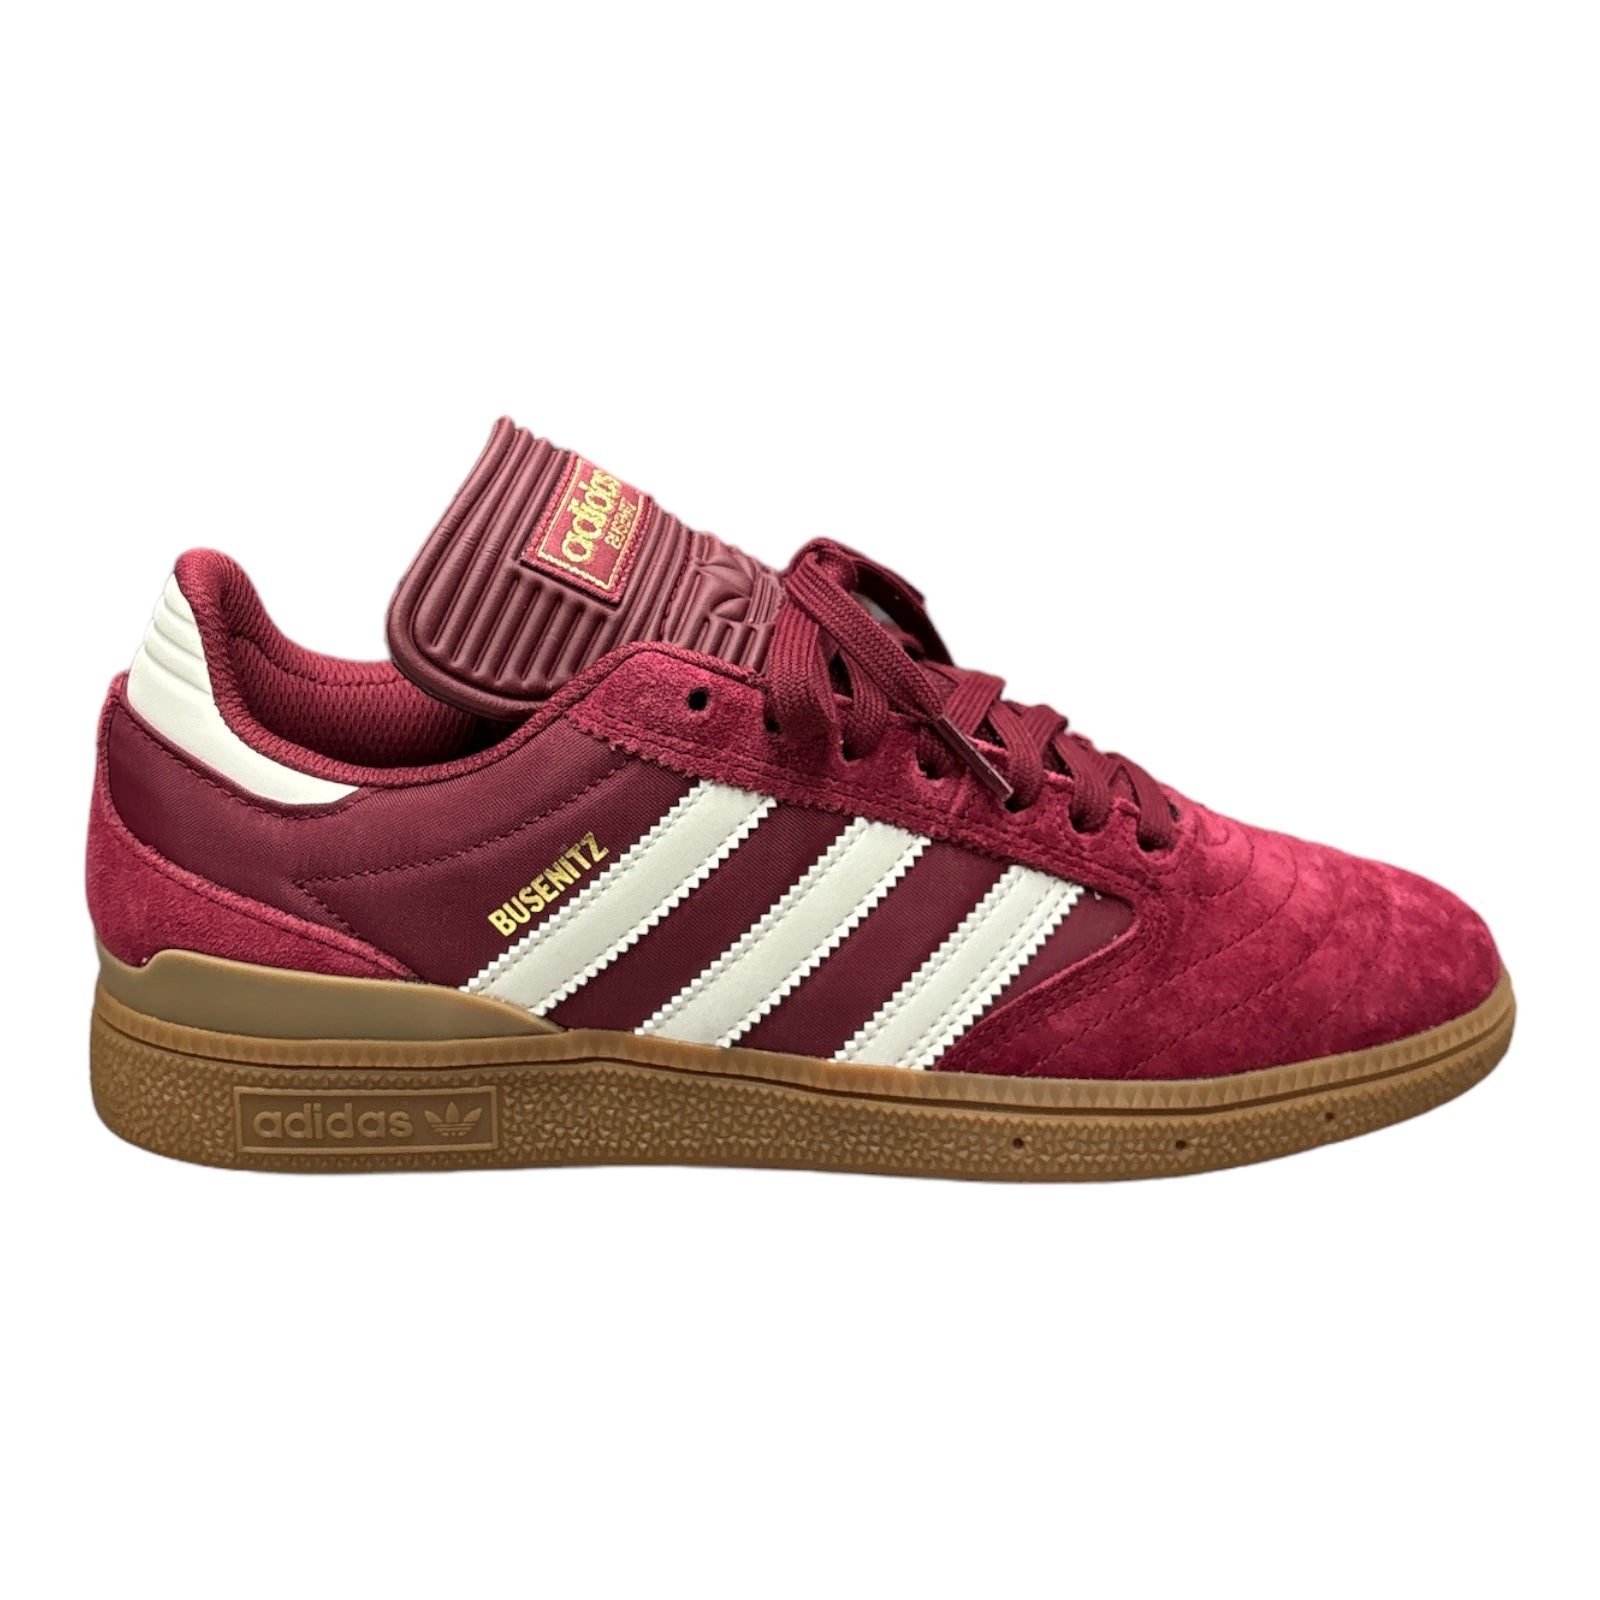 Burgandy Suede with White Stripes and a gum outsole Adidas Busenitz Skate Shoe